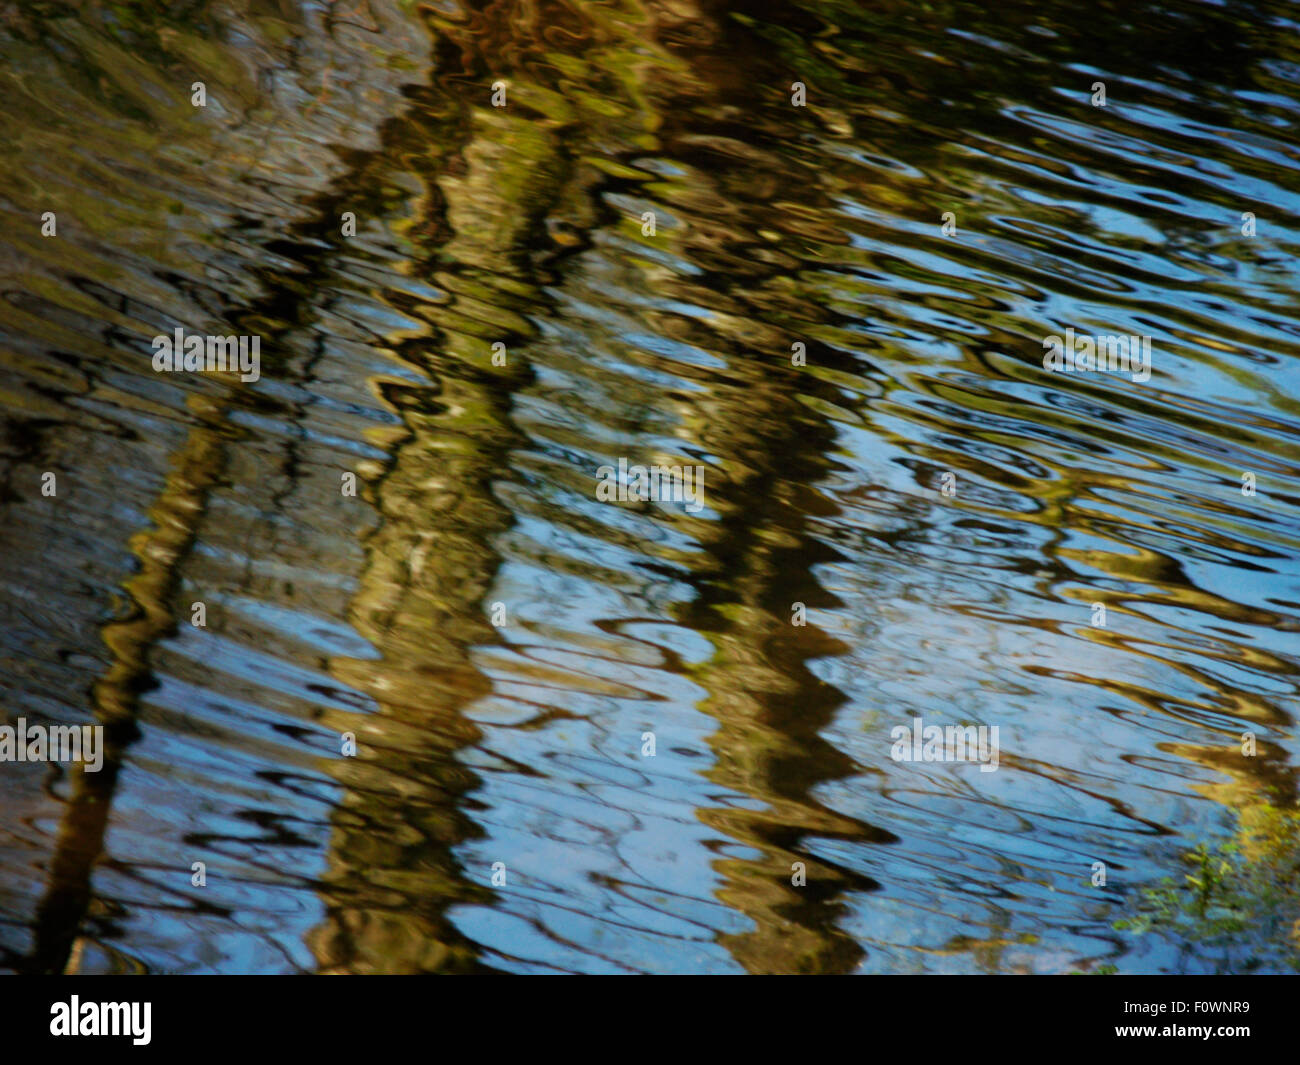 Rippling water reflects clear blue skies Stock Photo